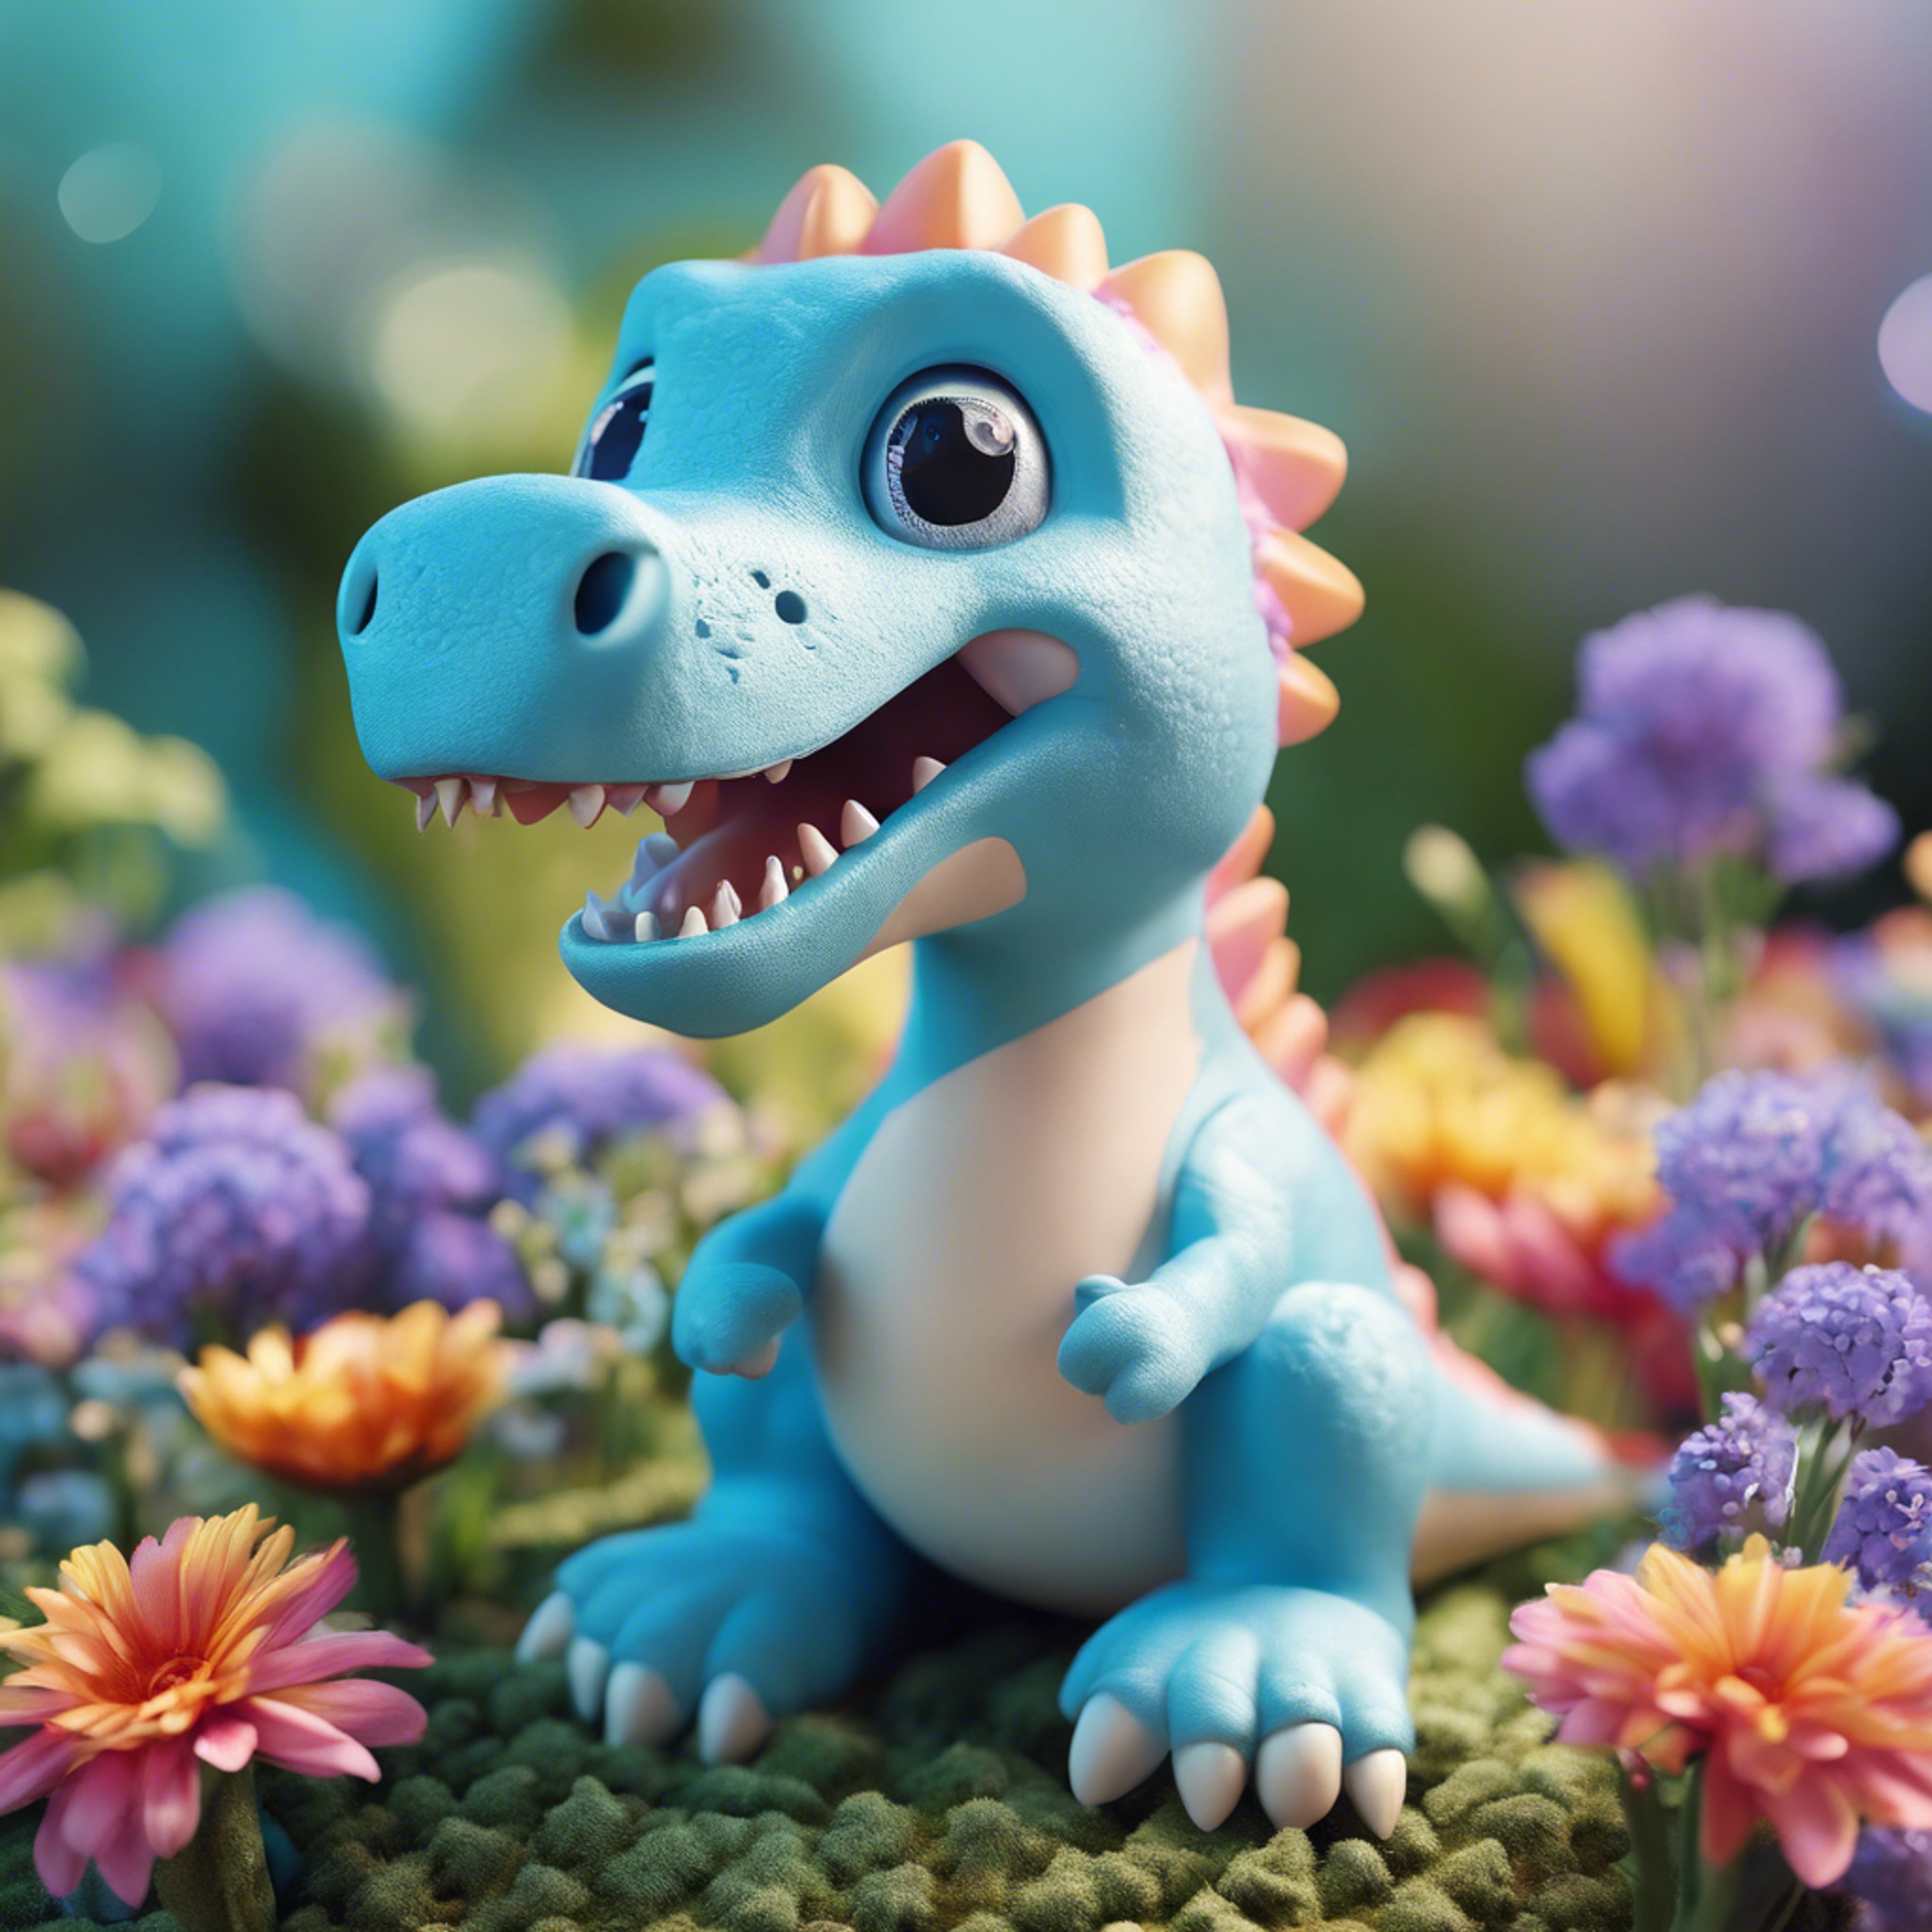 A cute light blue dinosaur with a kawaii expression, surrounded by brightly colored flowers. Ταπετσαρία[445e6142c59b4fa2886e]